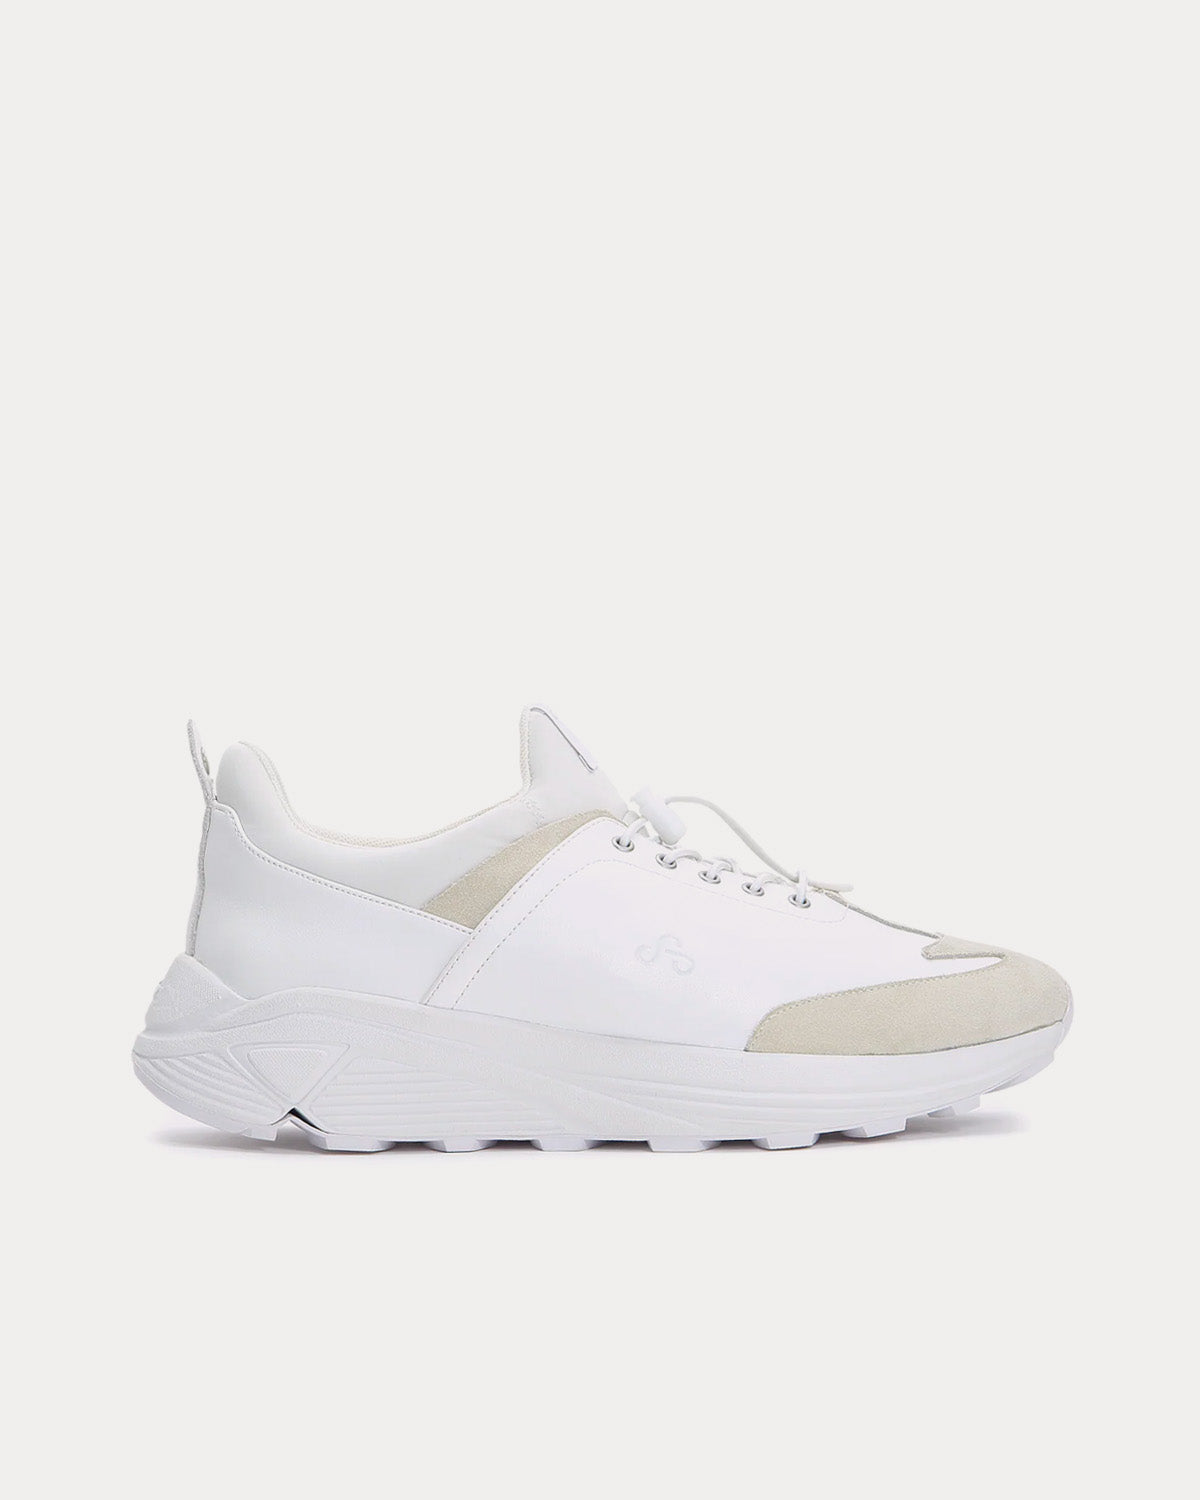 OAO - Mona White Low Top Sneakers